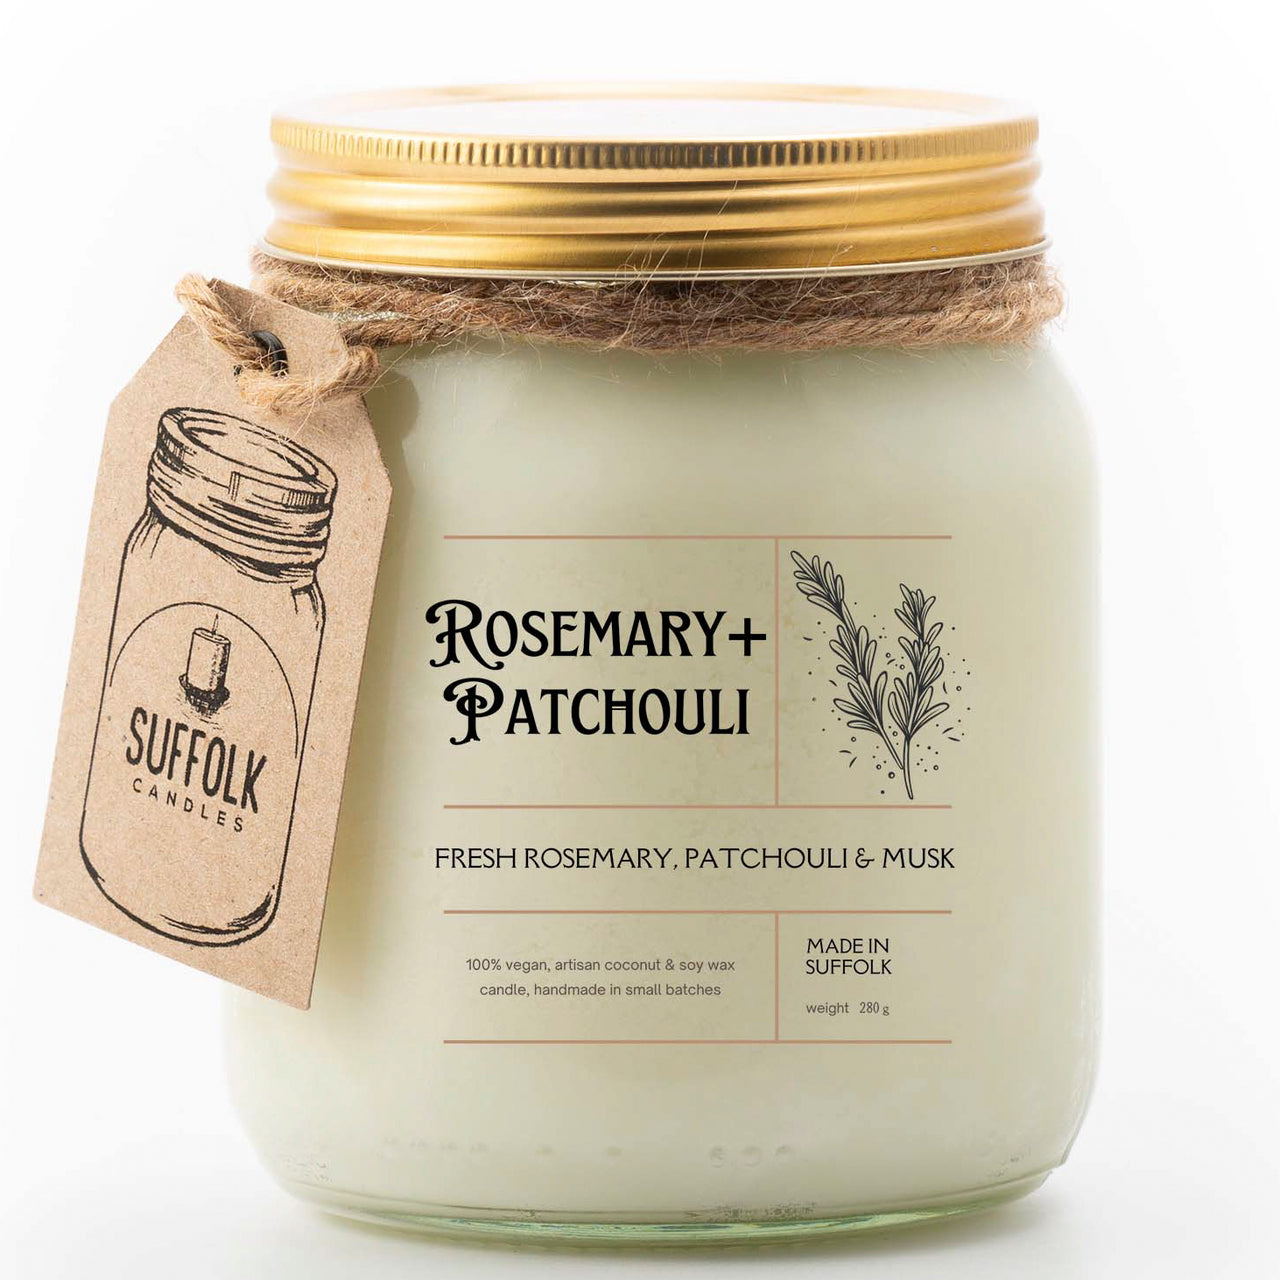 Rosemary & Patchouli Candle